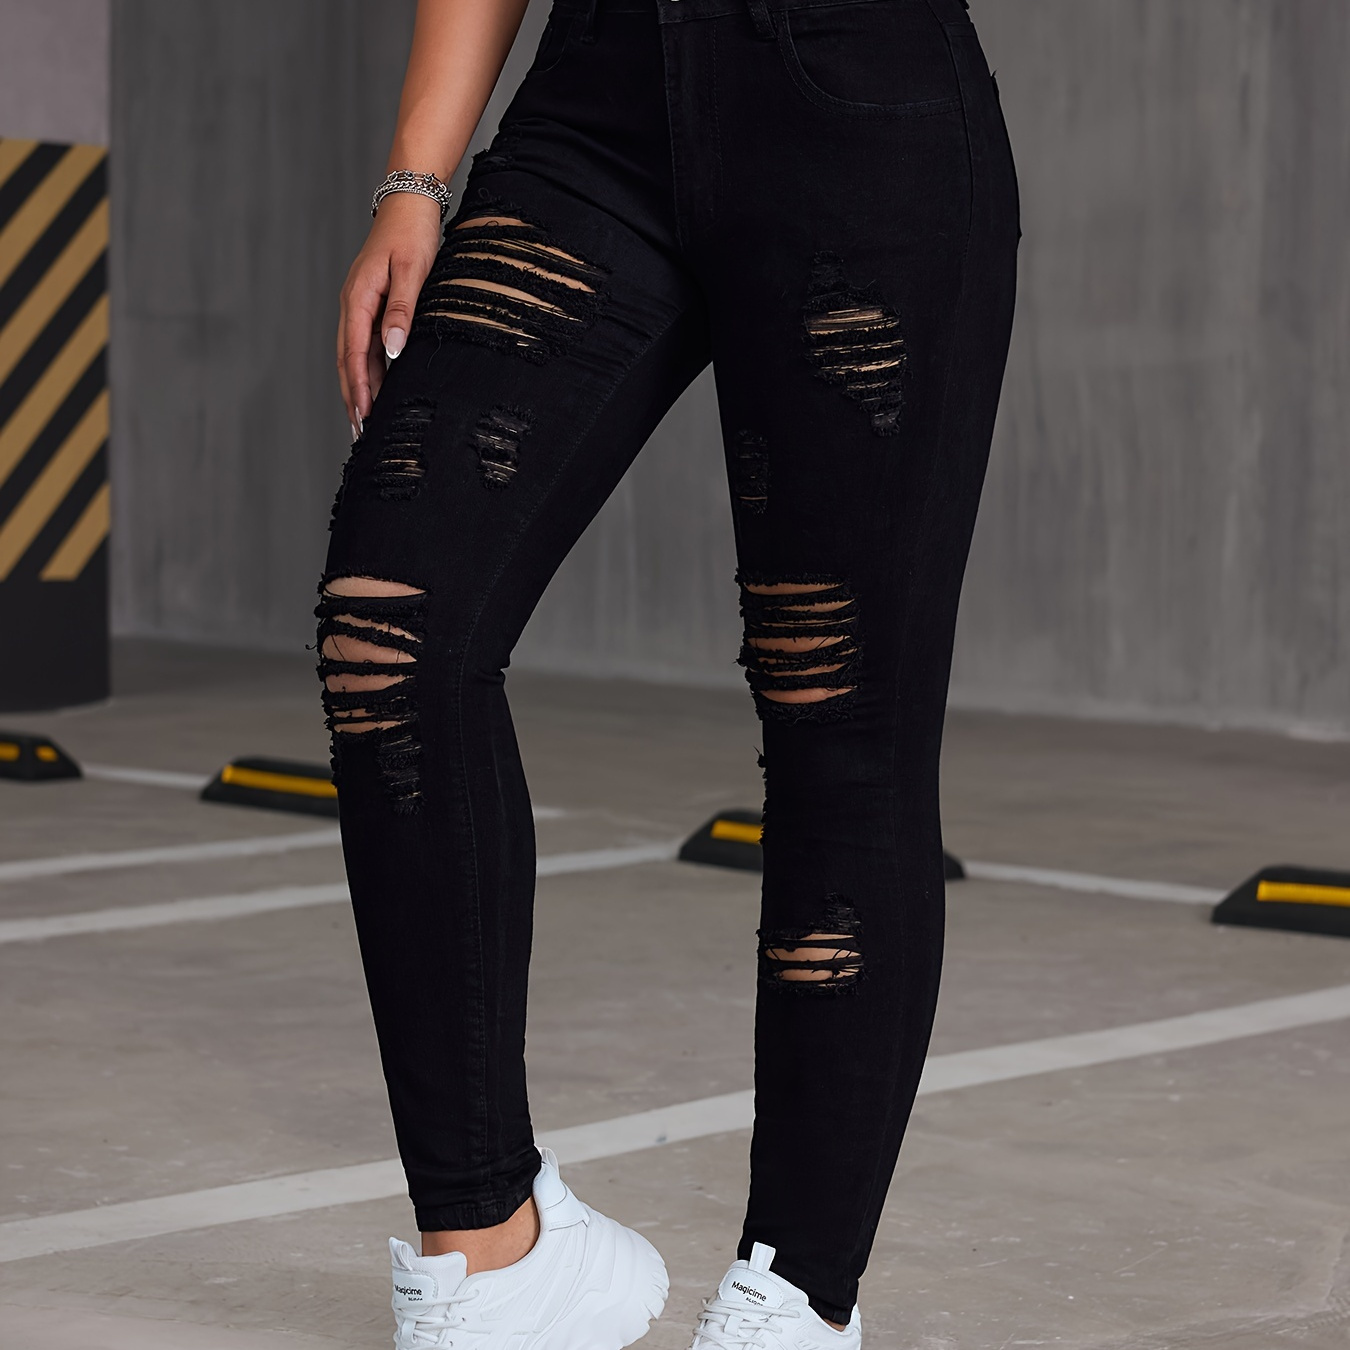 Ripped Jeans for Women